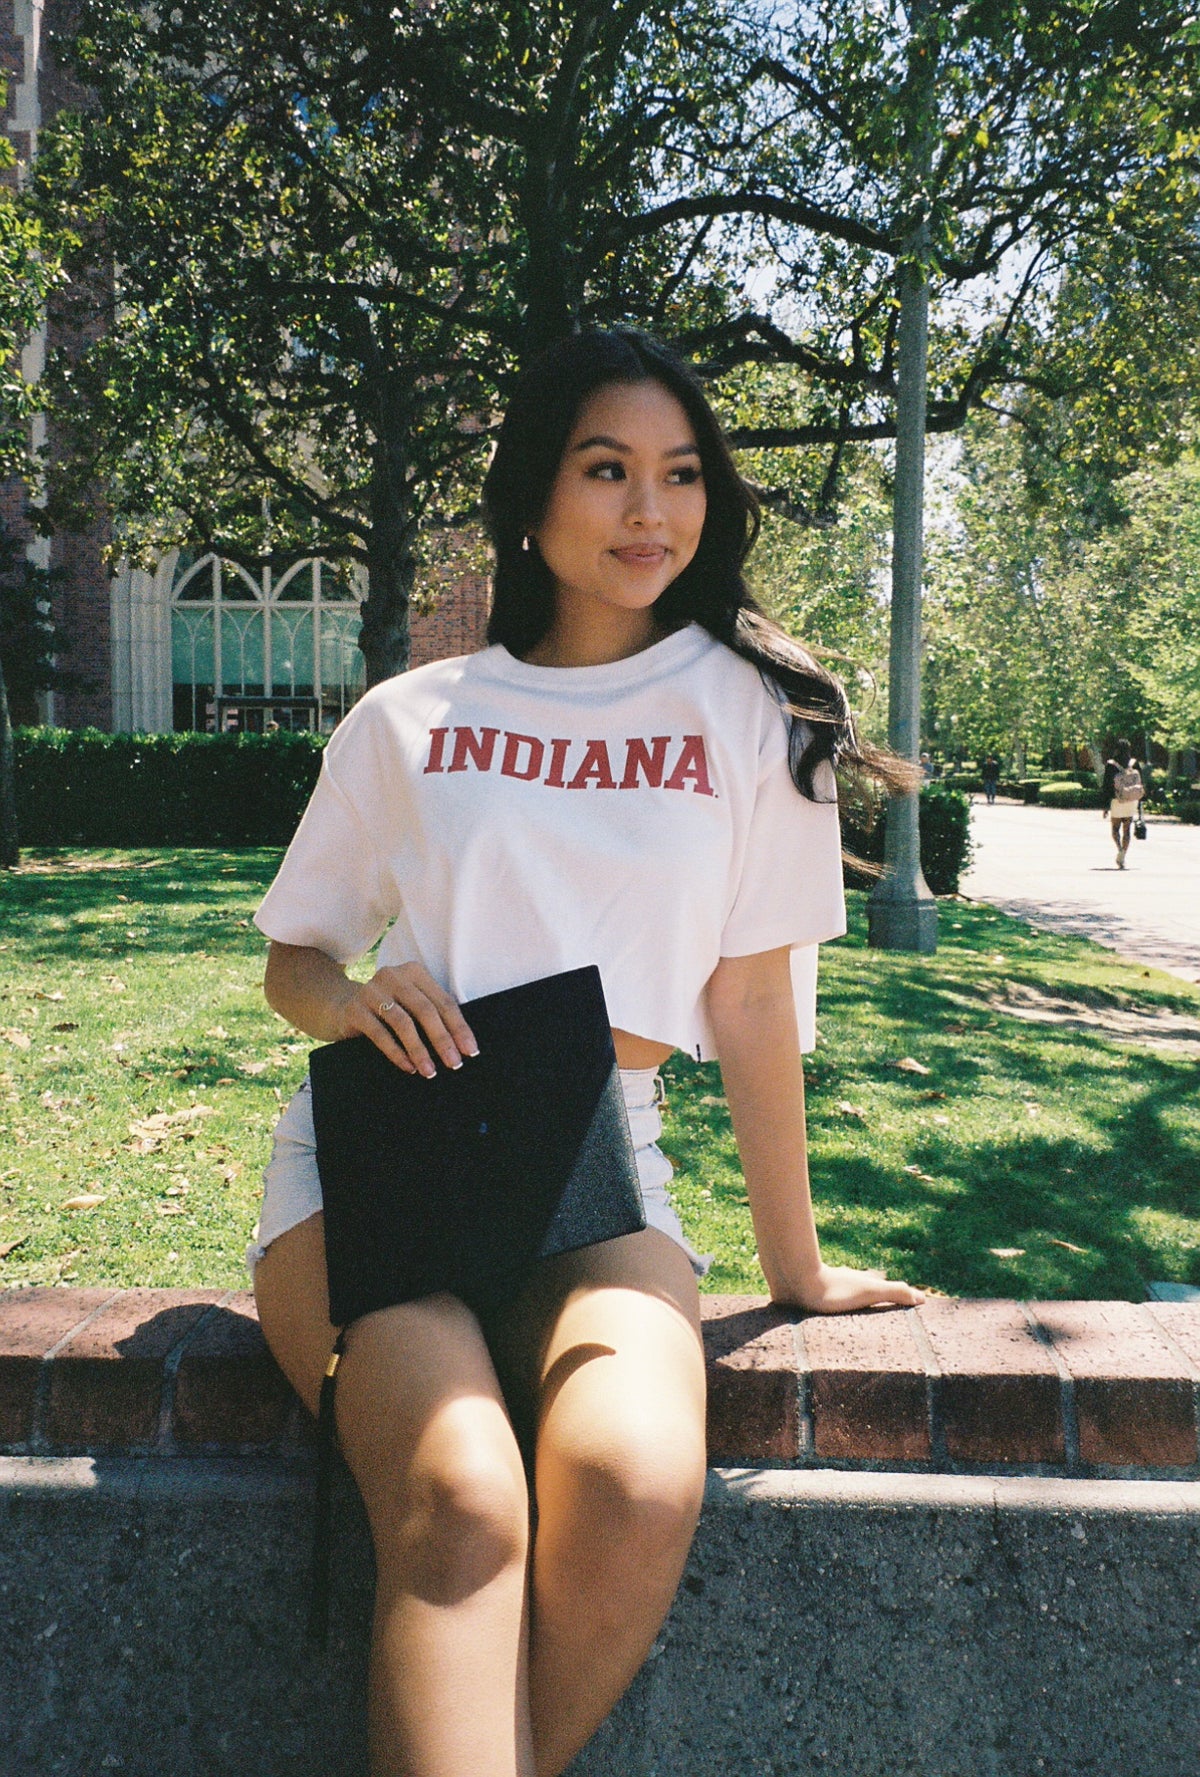 Indiana Track Top